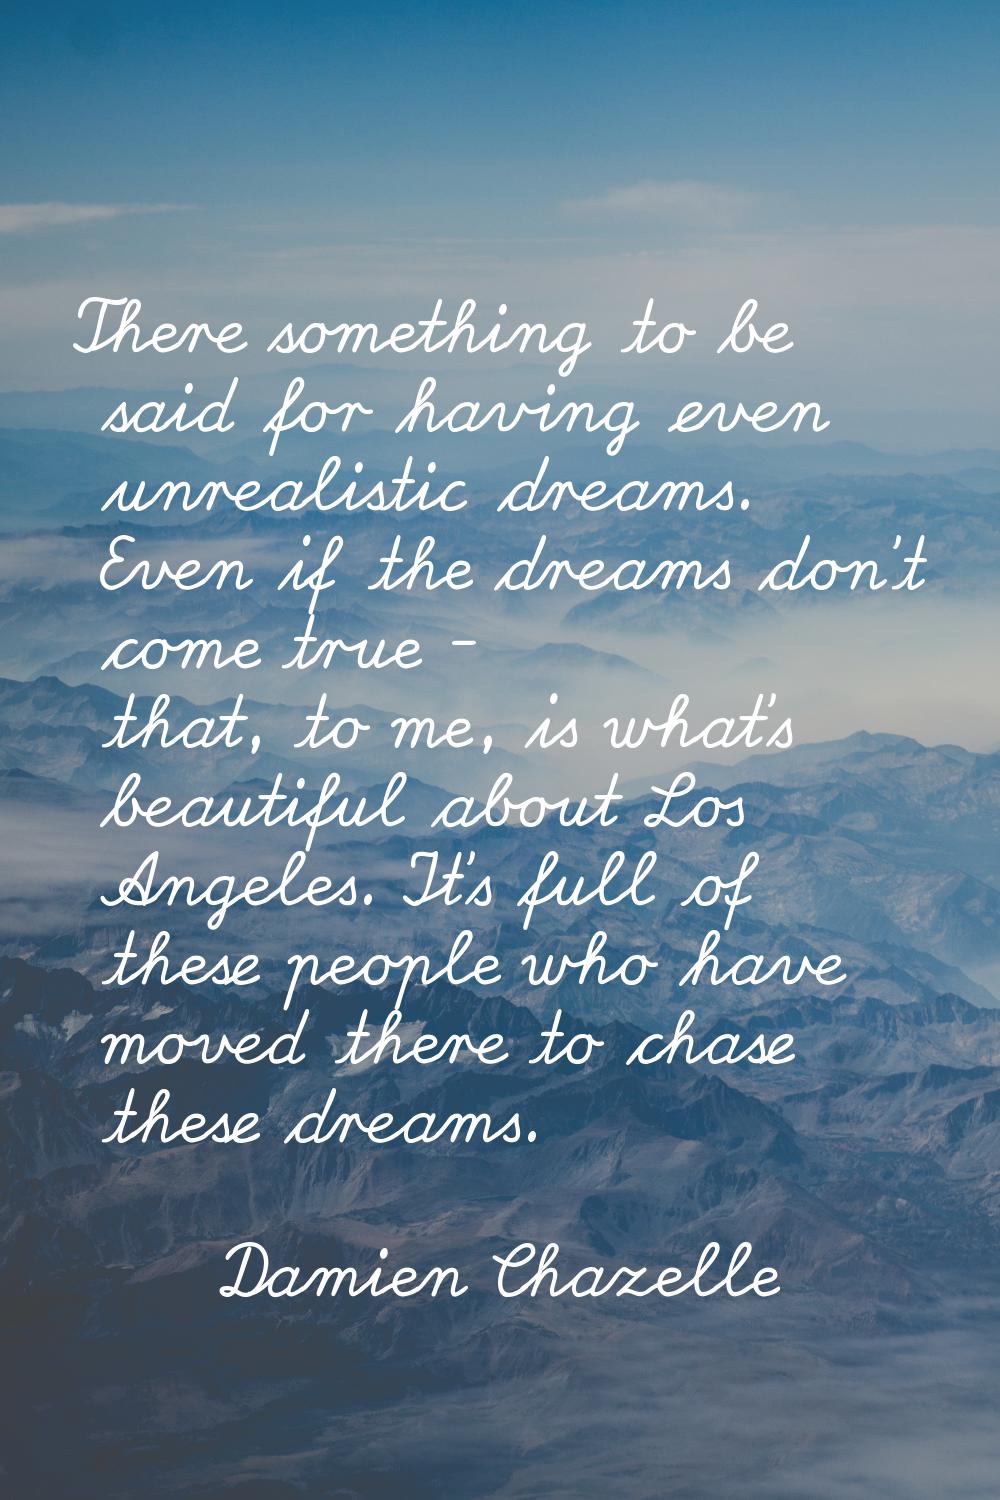 There something to be said for having even unrealistic dreams. Even if the dreams don't come true -